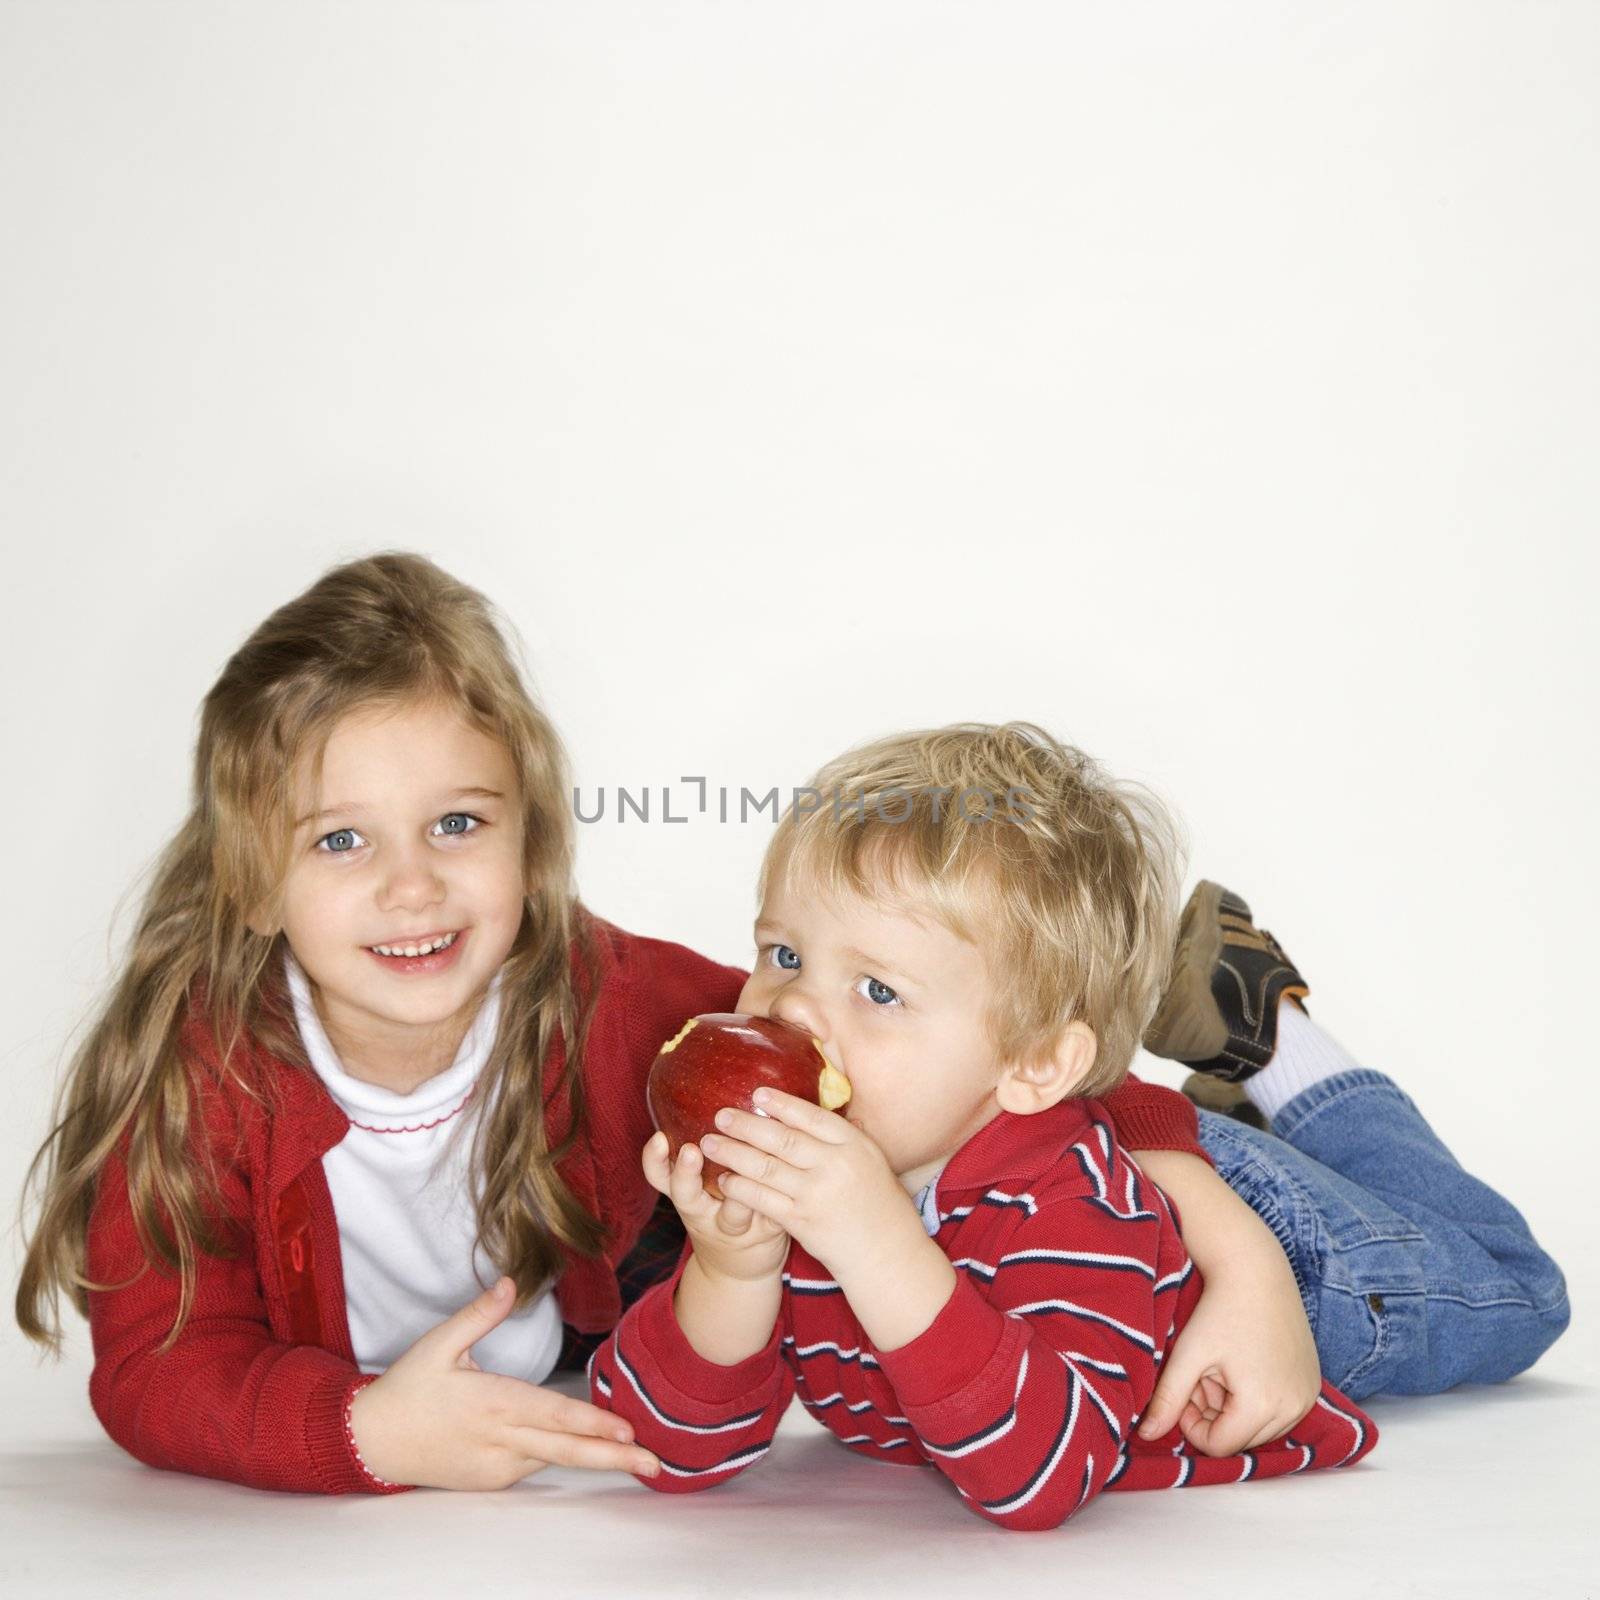 Studio portrait of Caucasian girl with arm around boy eating apple against white background.